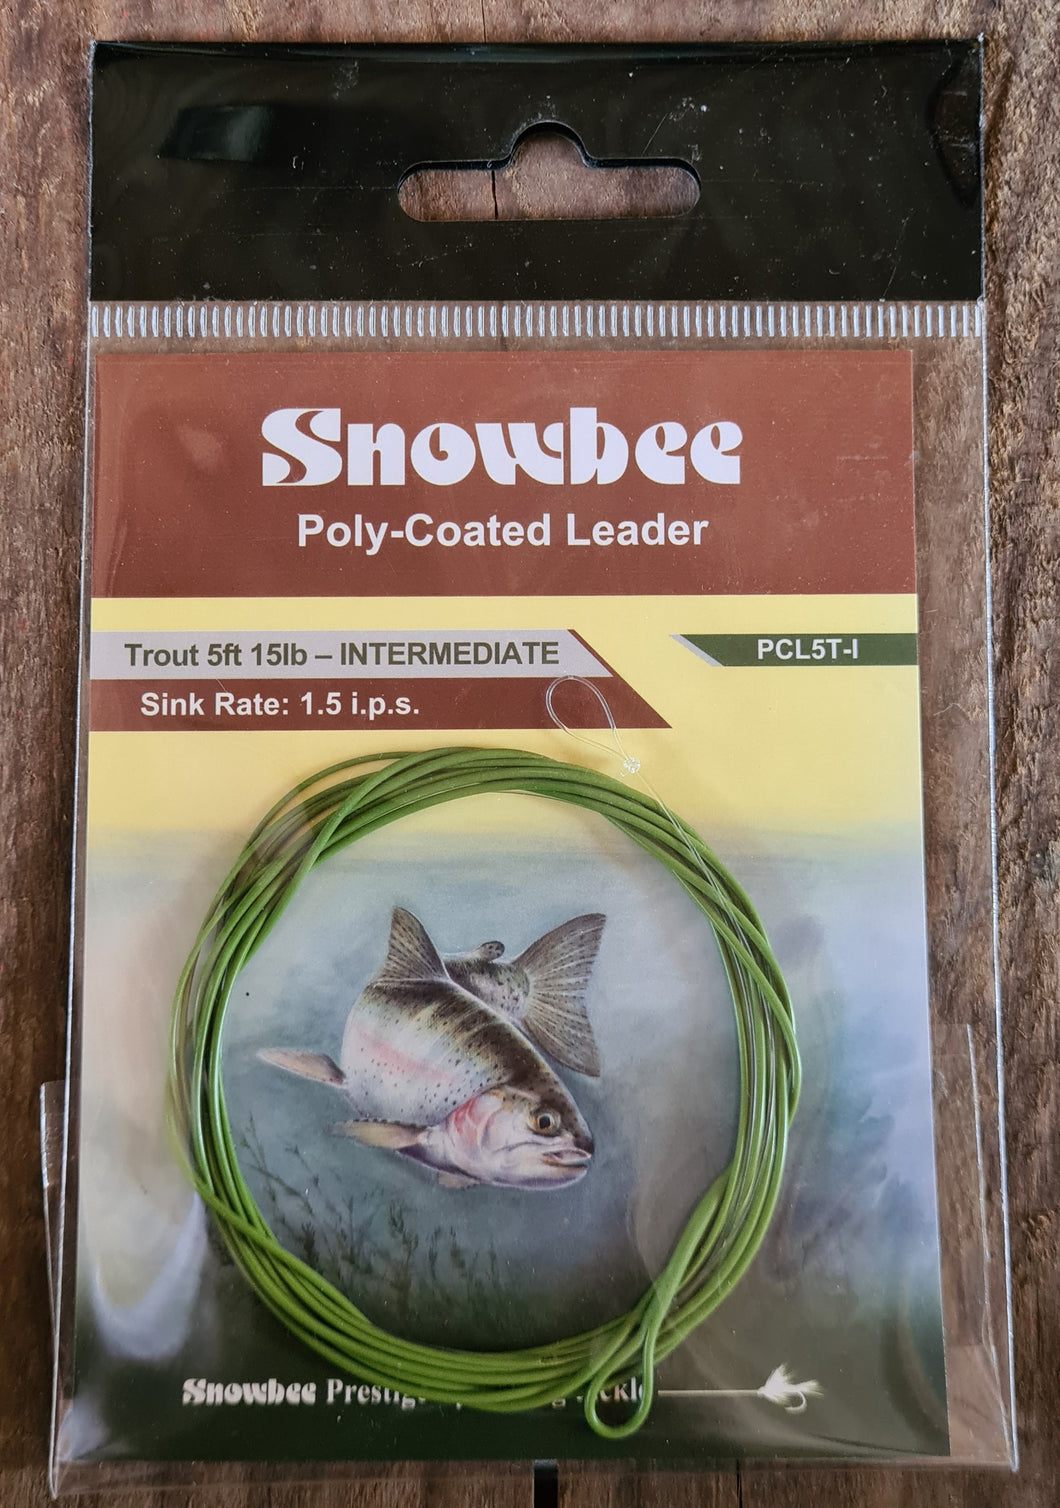 Snowbee Poly-Coated Leader PCL5T-I